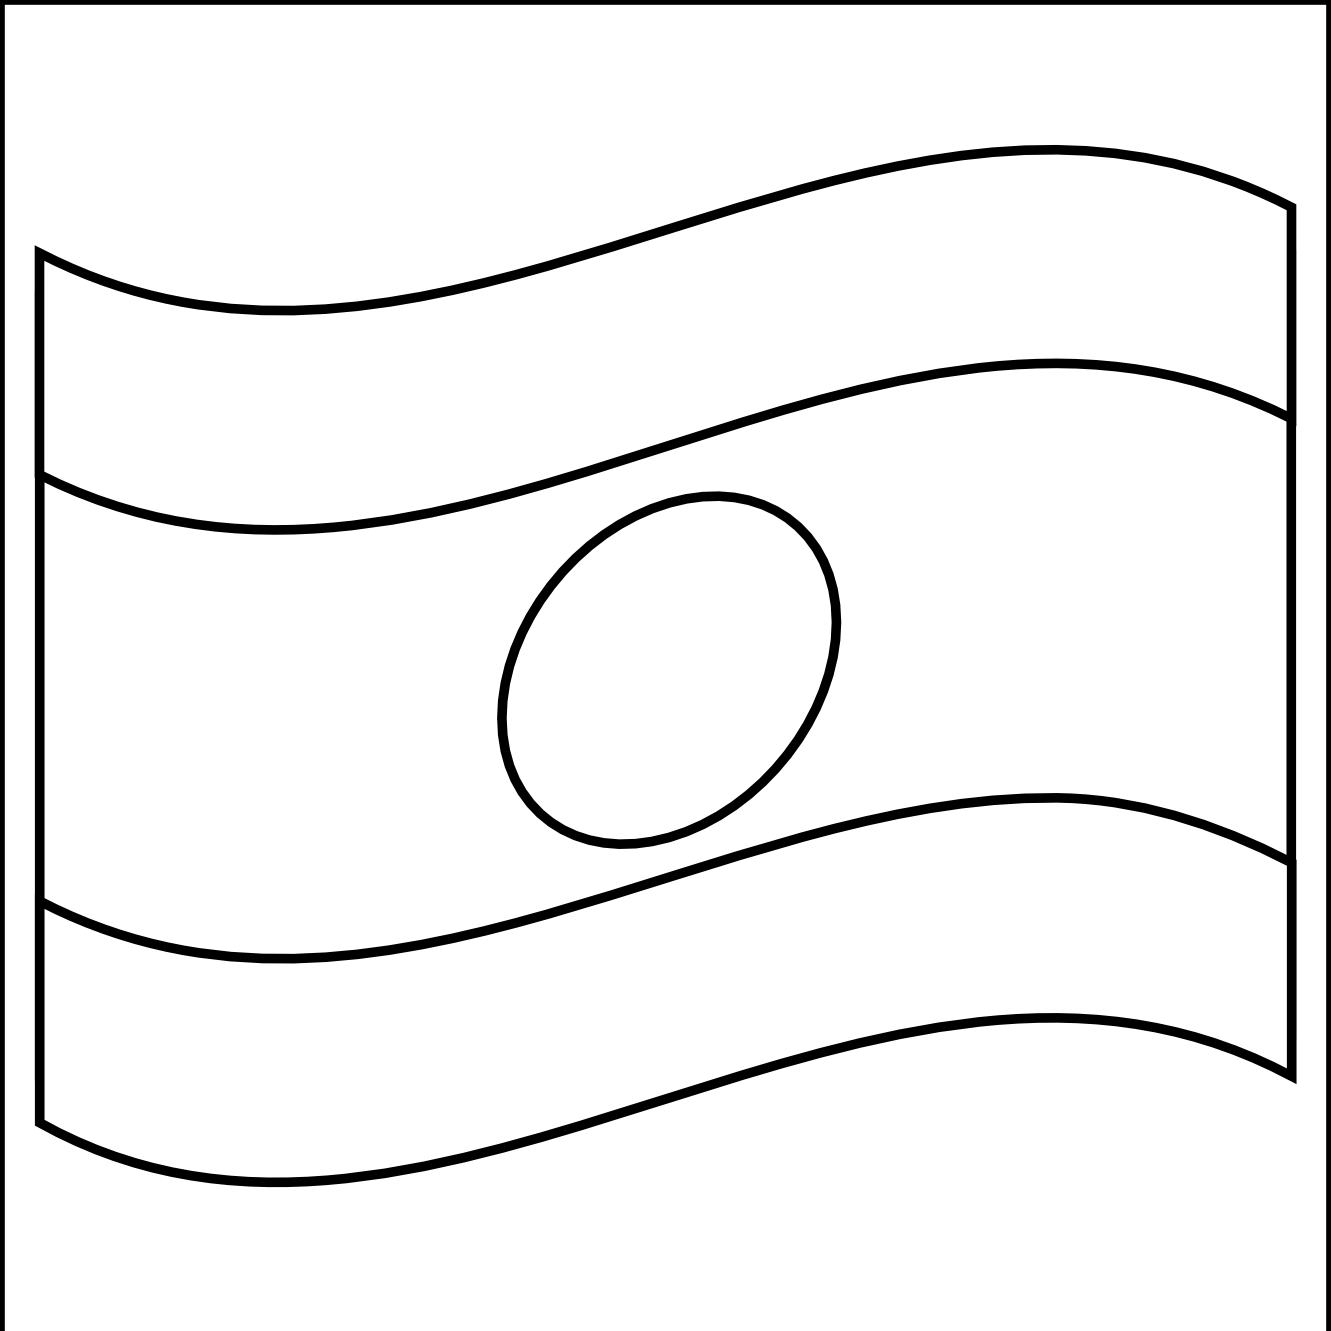 Flag clipart blank black and white 